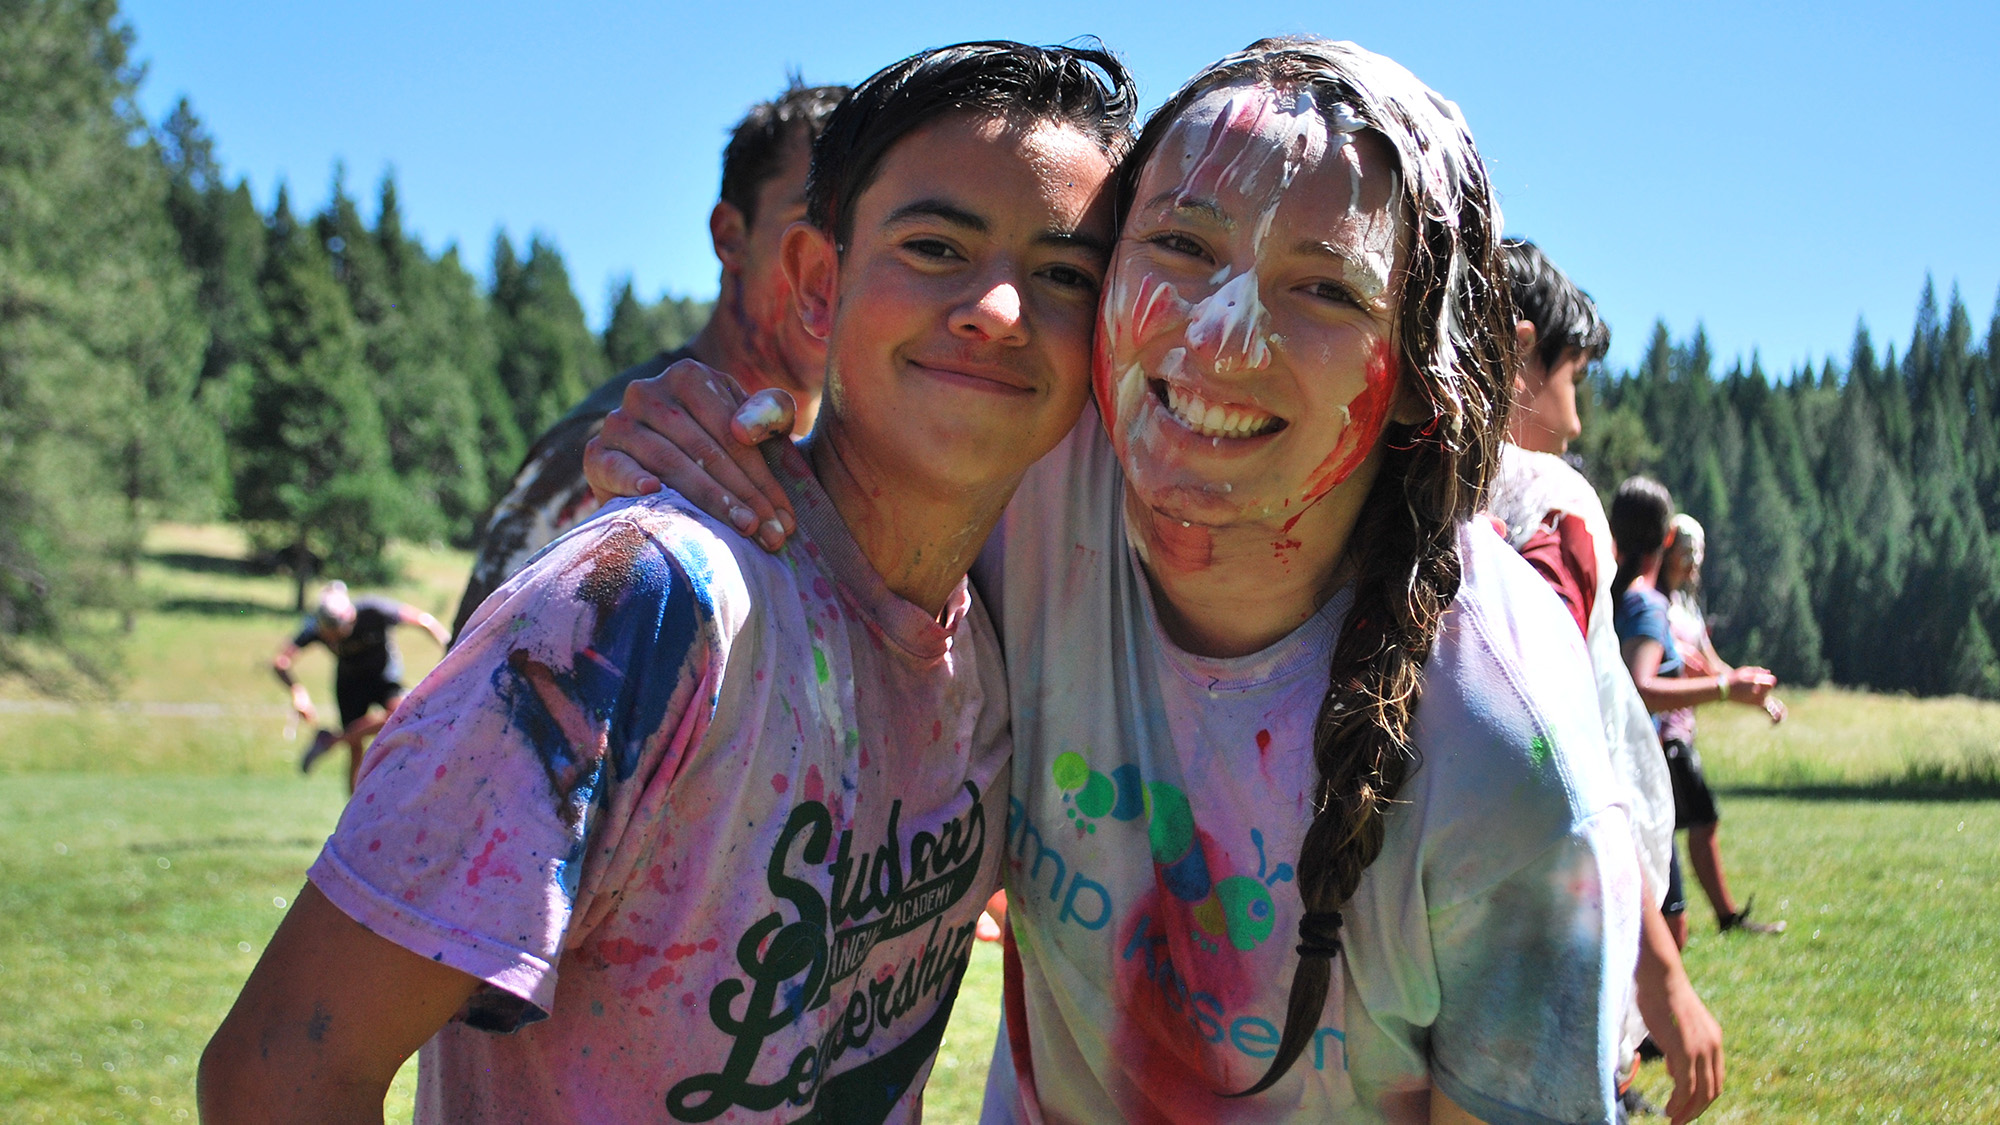 Camp counselor with paint on her face and clothes embraces a camper.